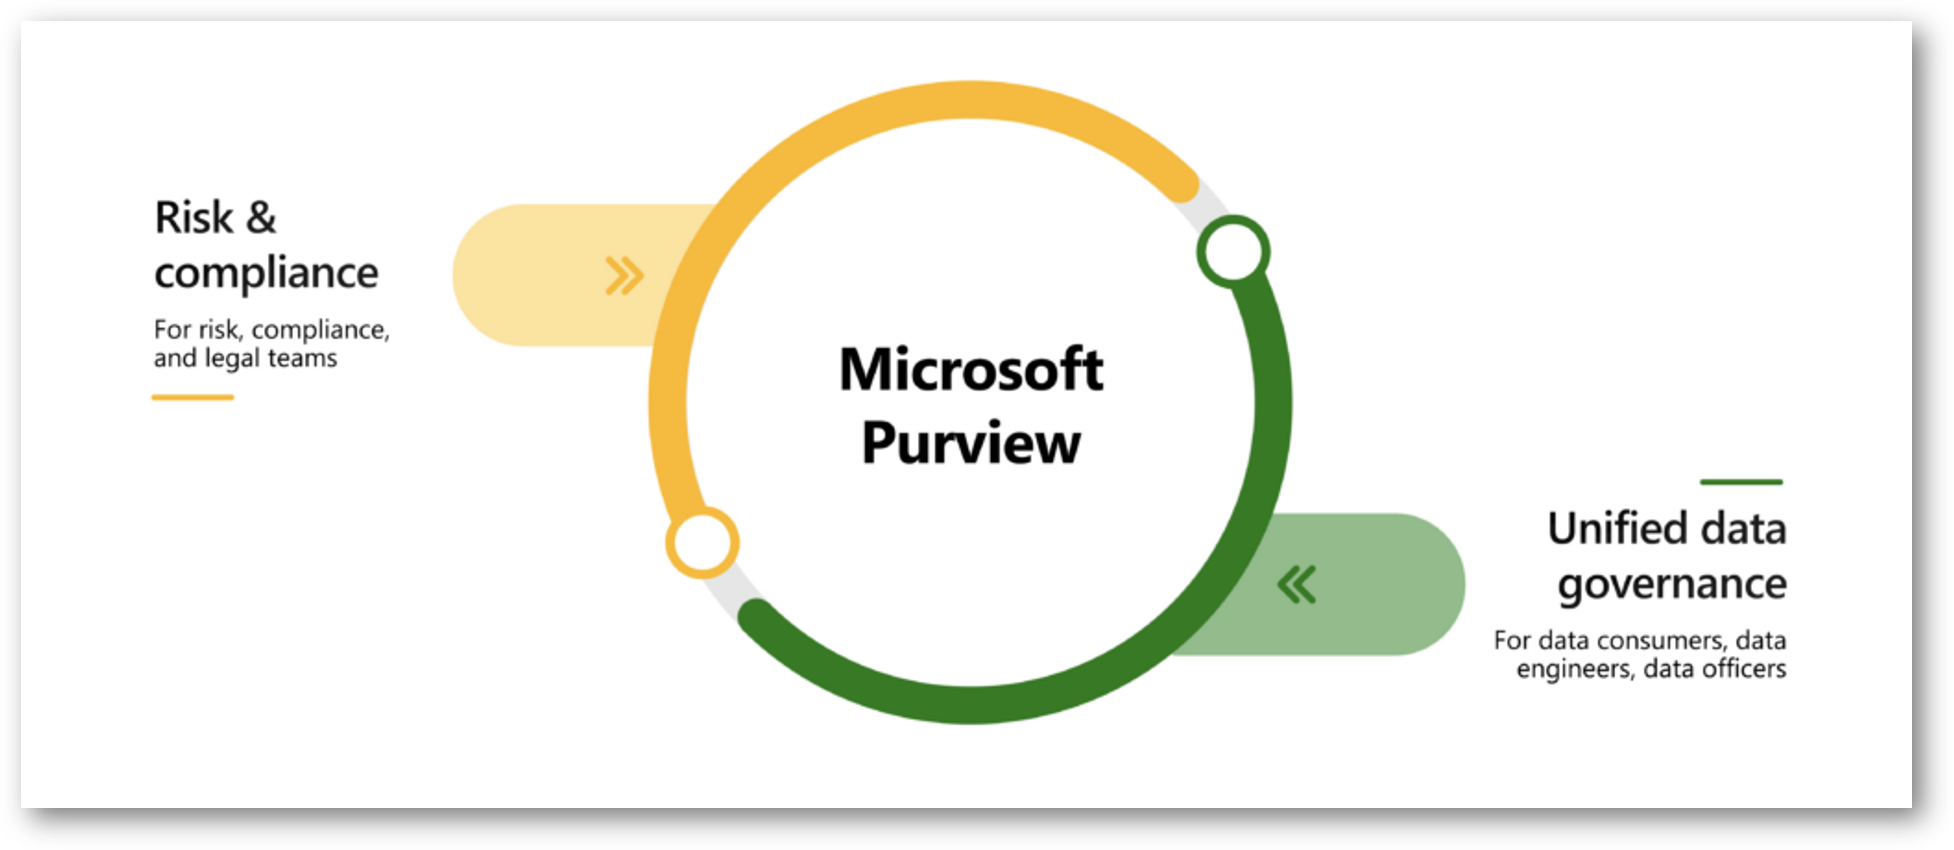 Microsoft Purview Overview